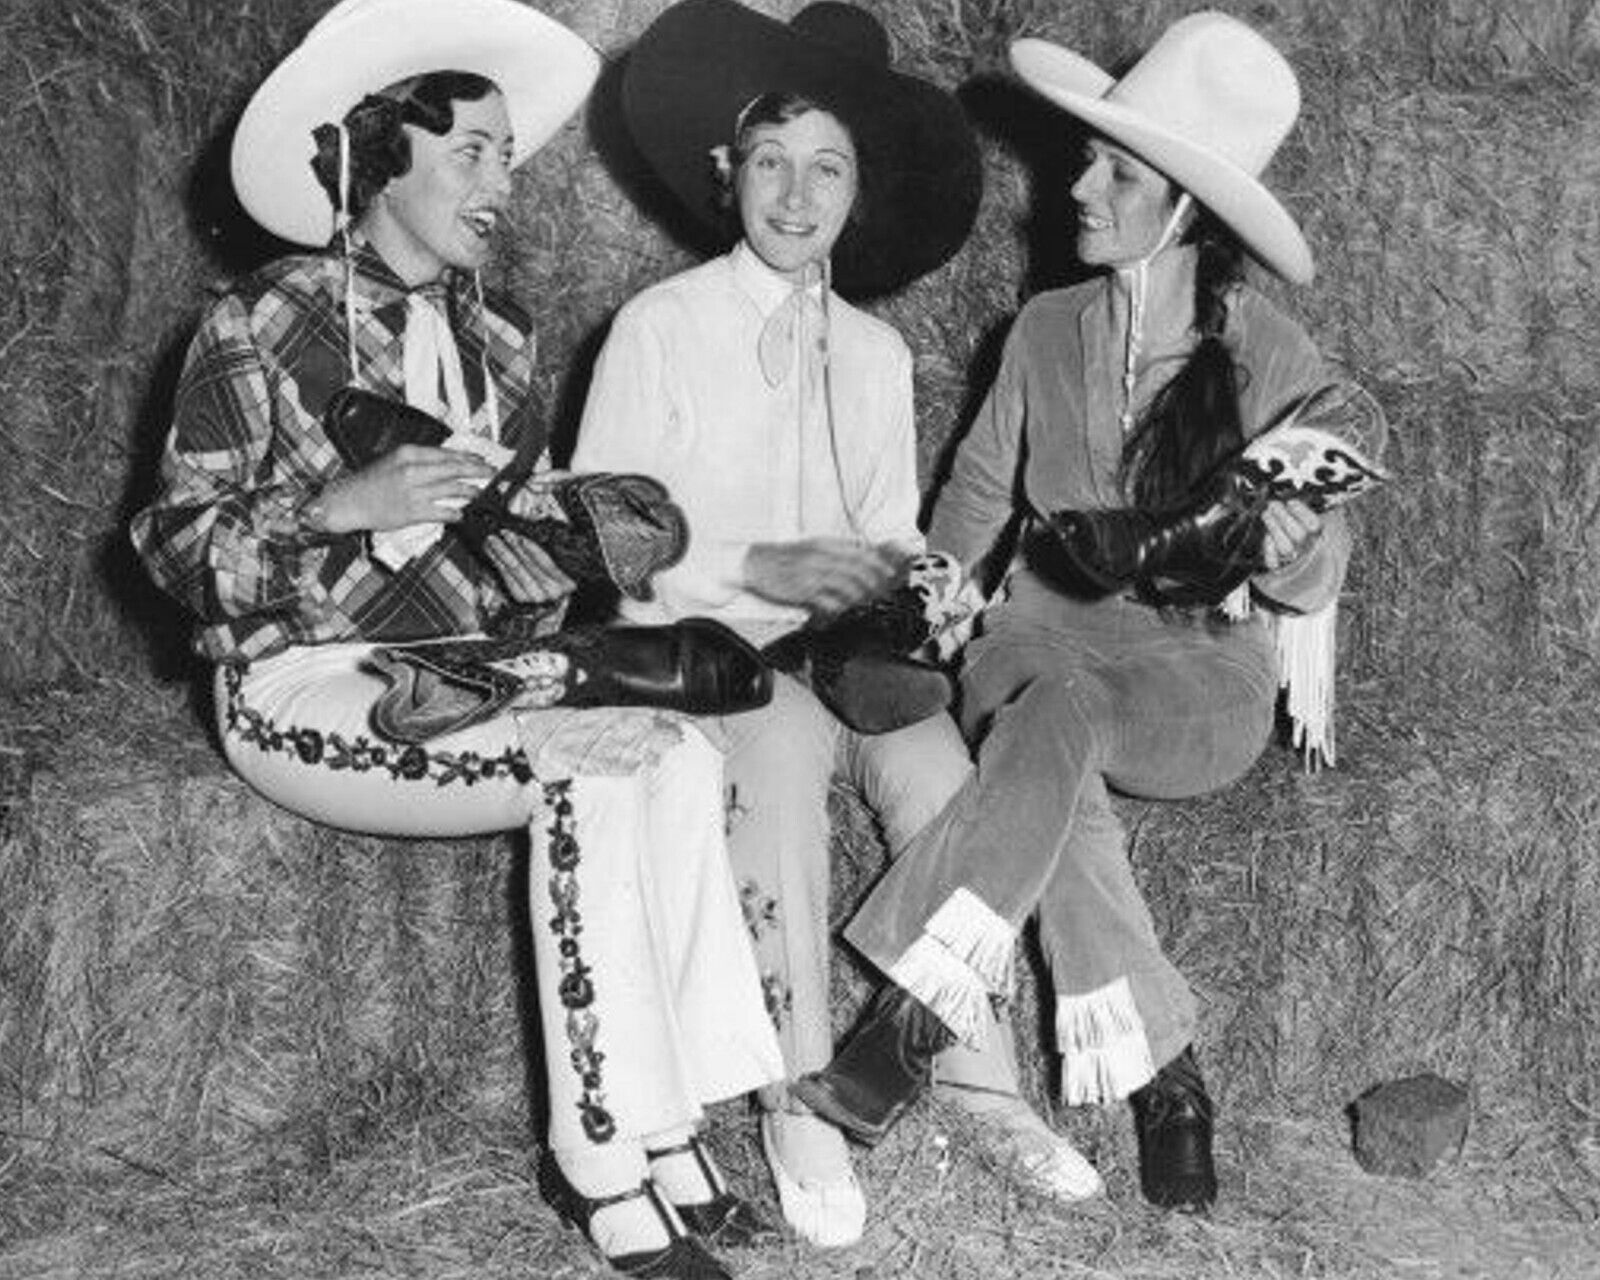 Old West Rodeo Cowgirls Wyoming 1941 Vintage Old Photo 8 x 10  Reprint